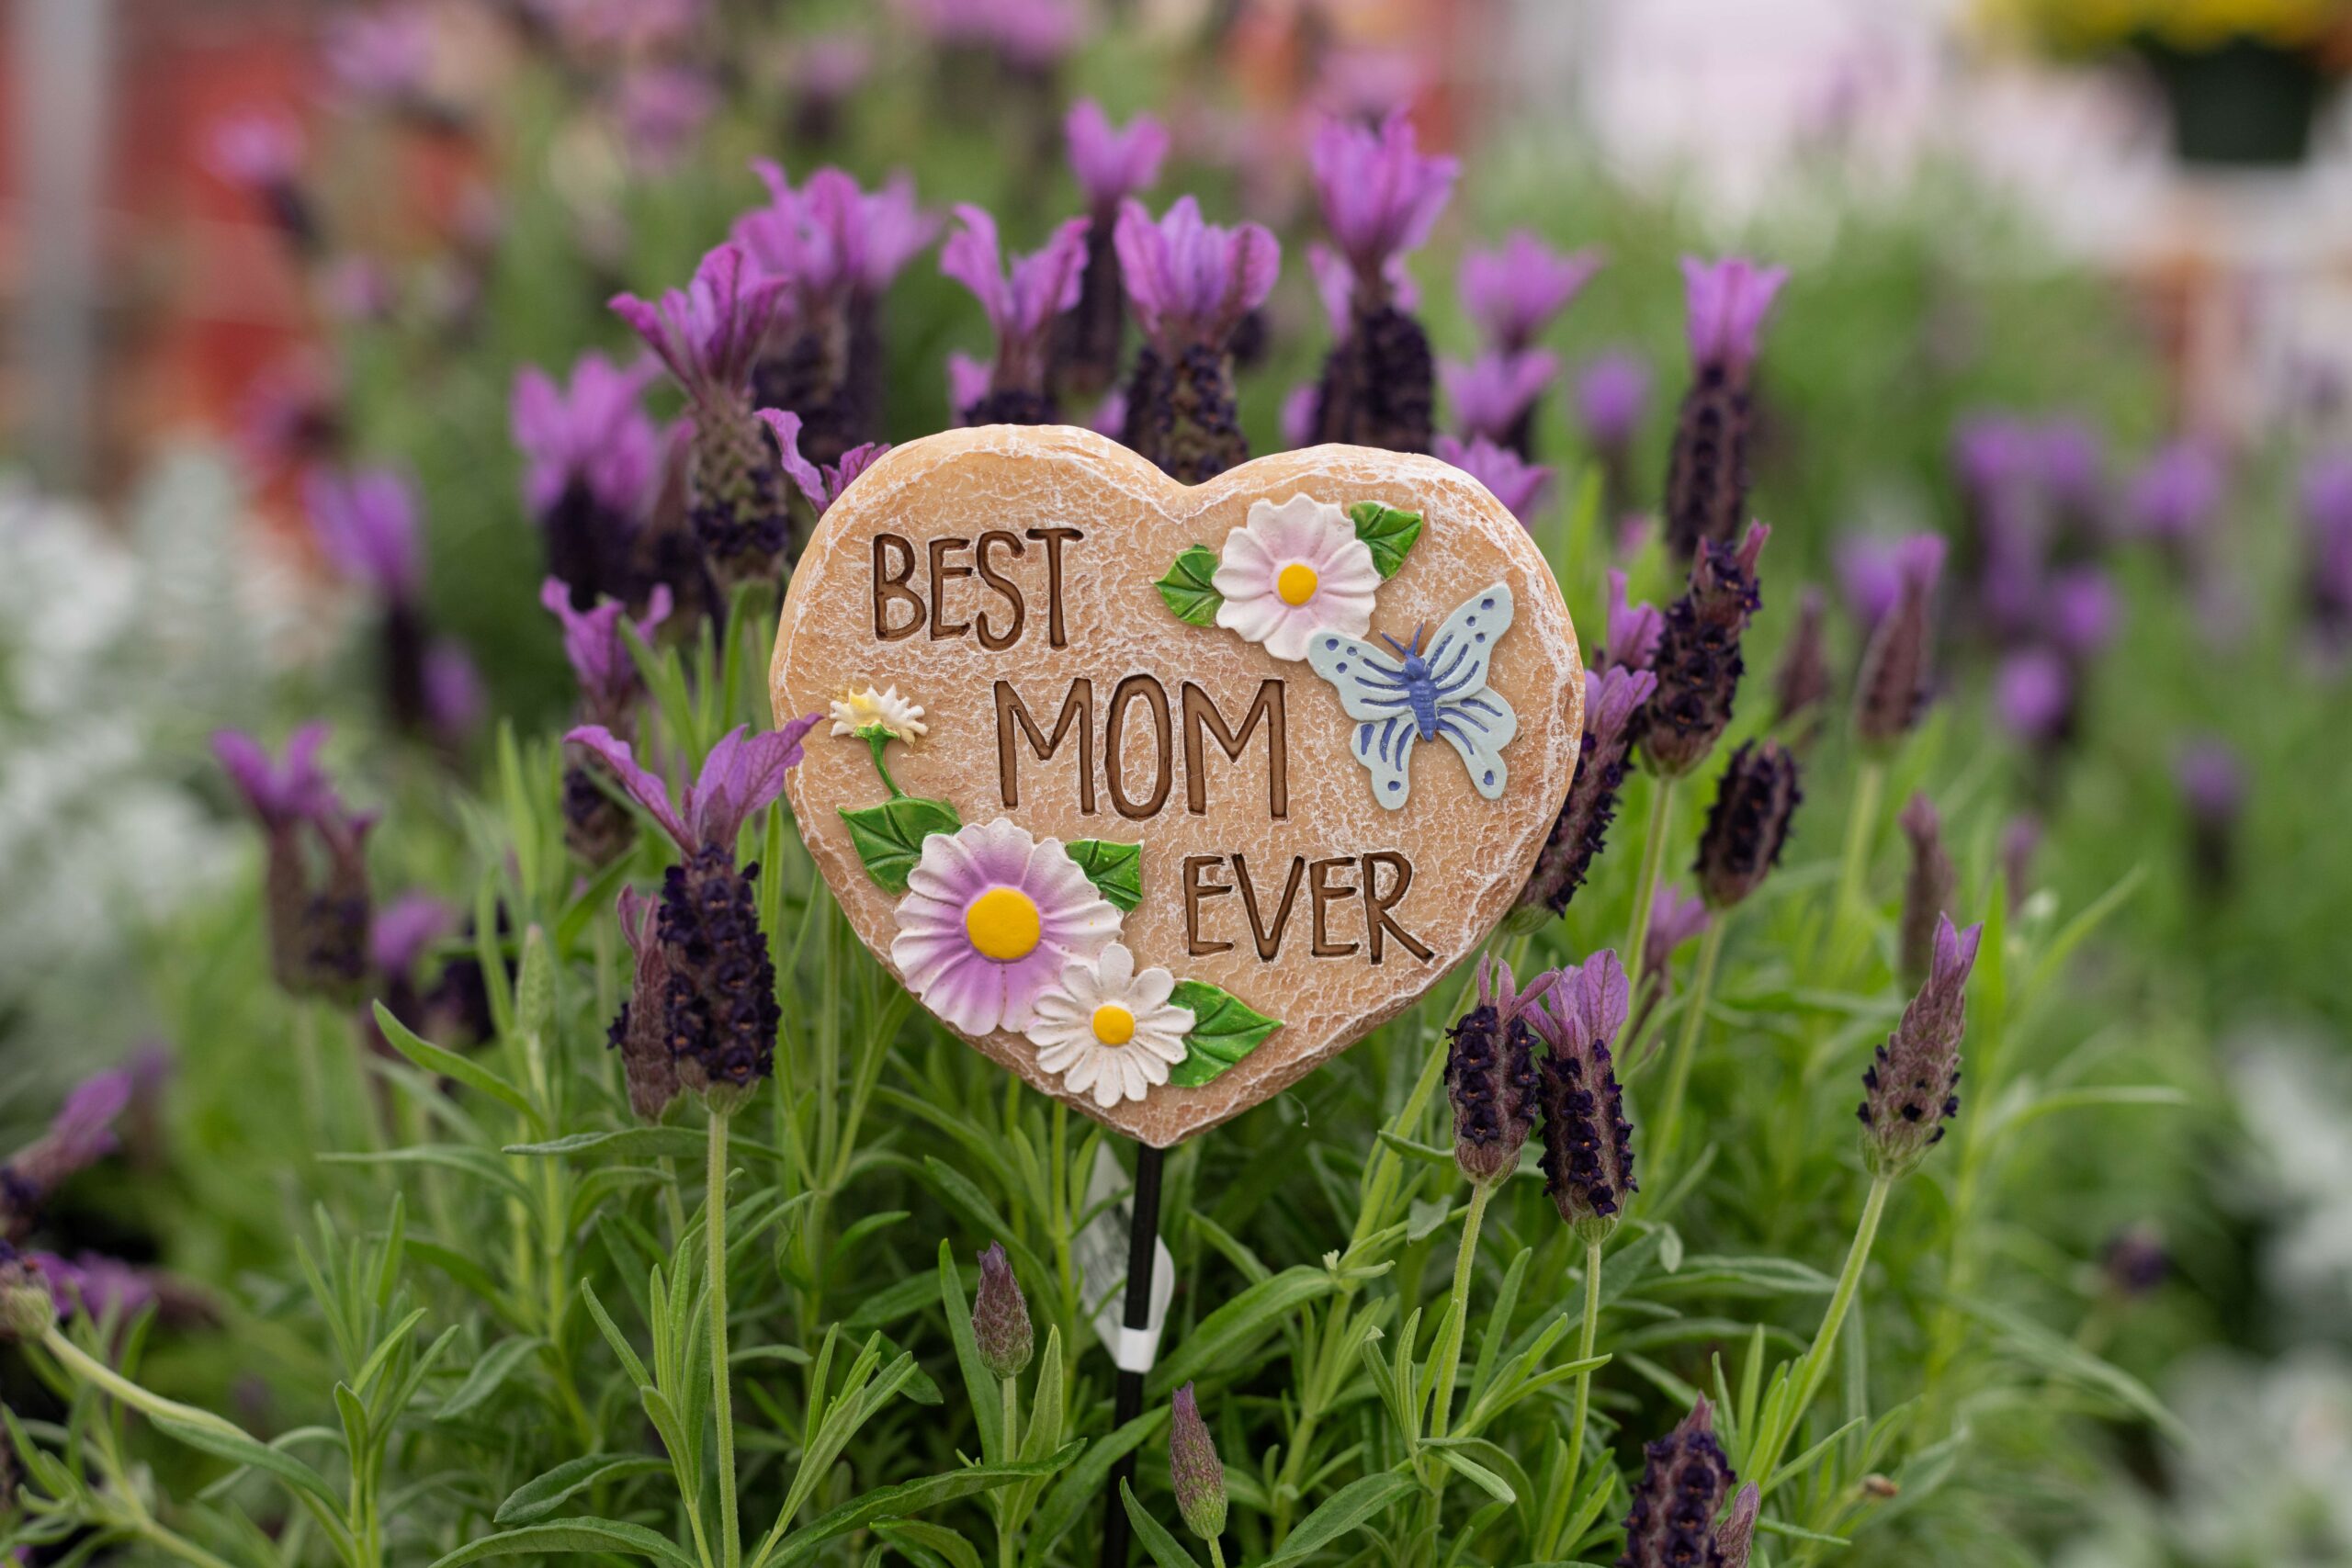 Mother’s Day gift ideas from local nurseries